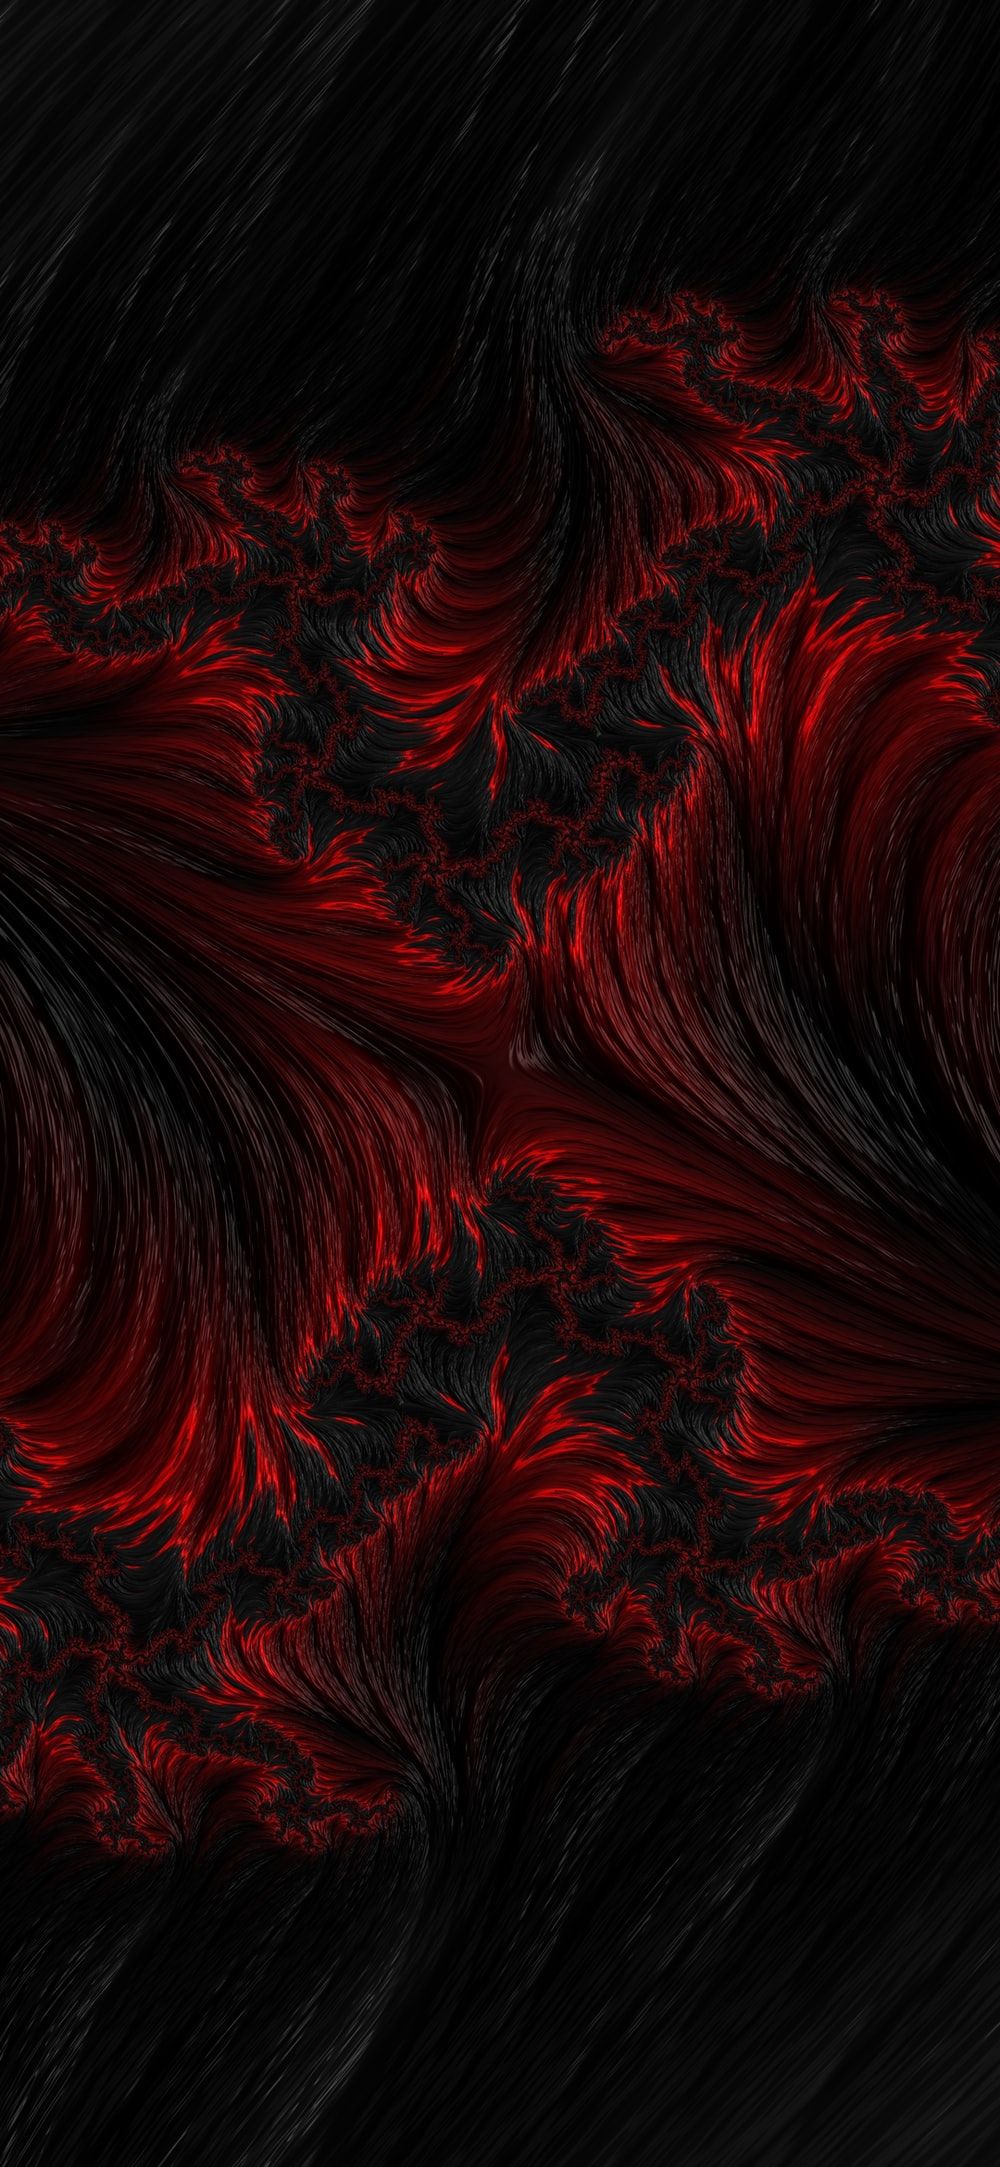 Black And Red Picture. Download Free Image